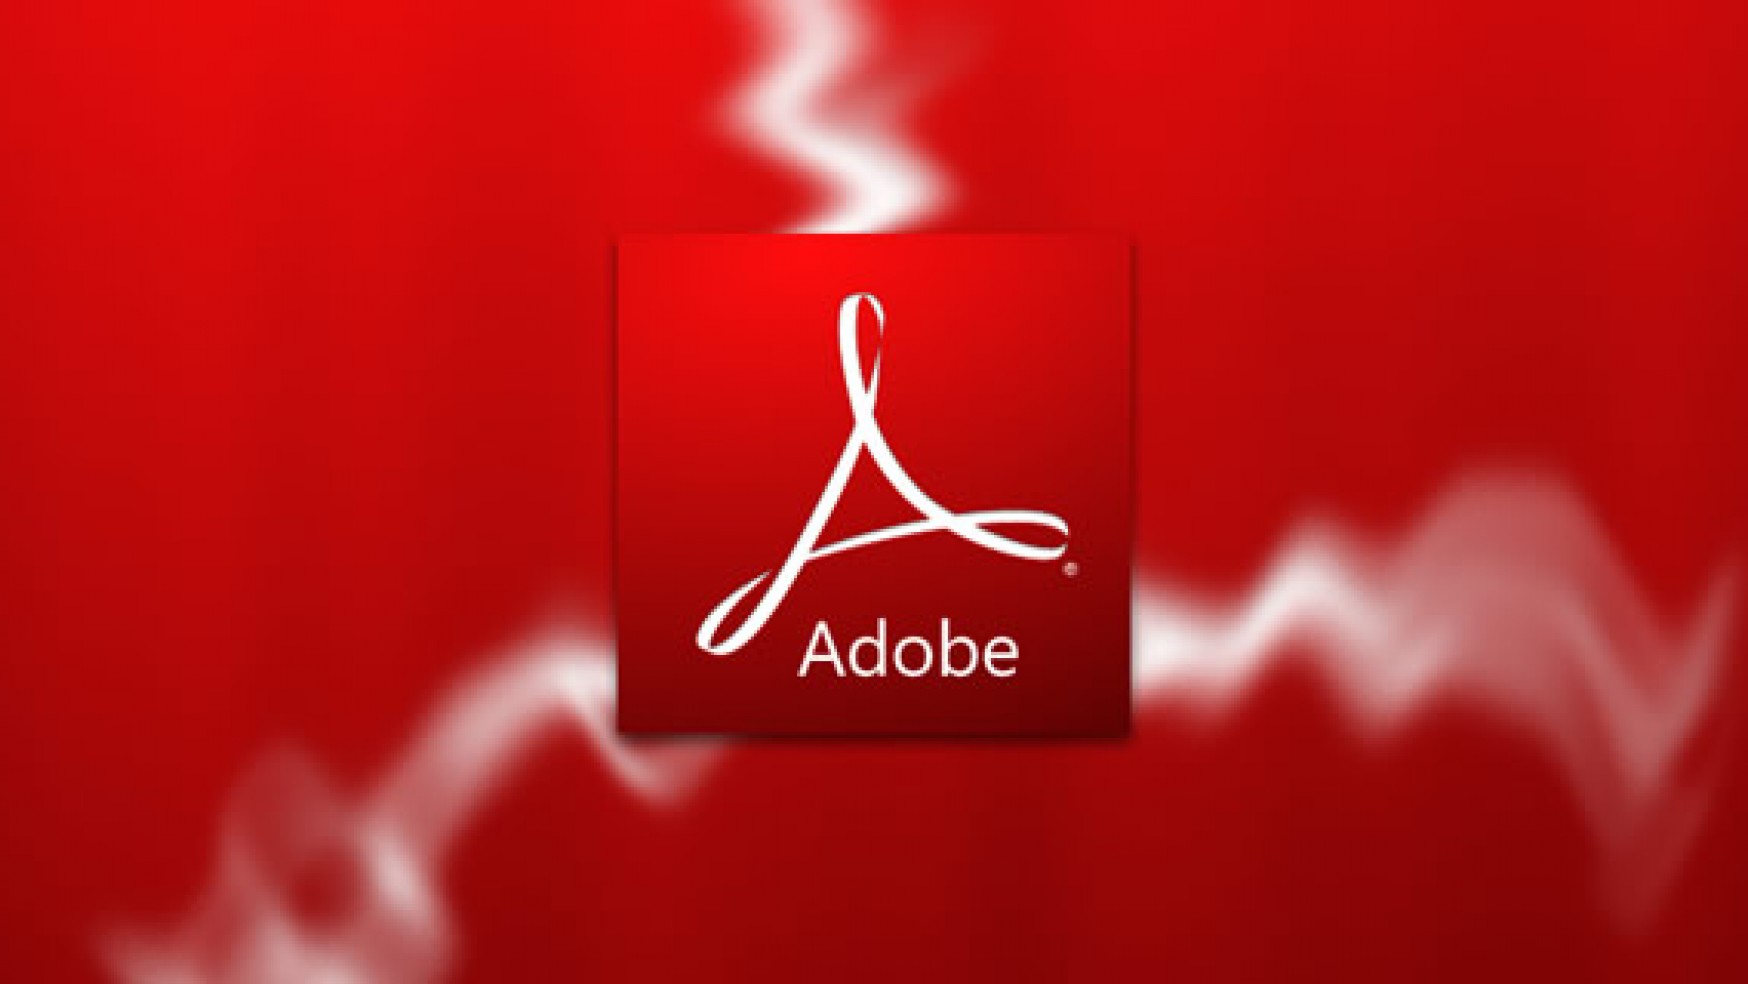 Adobe recommends users update their product installations to the latest version. Image Credit: Blorge